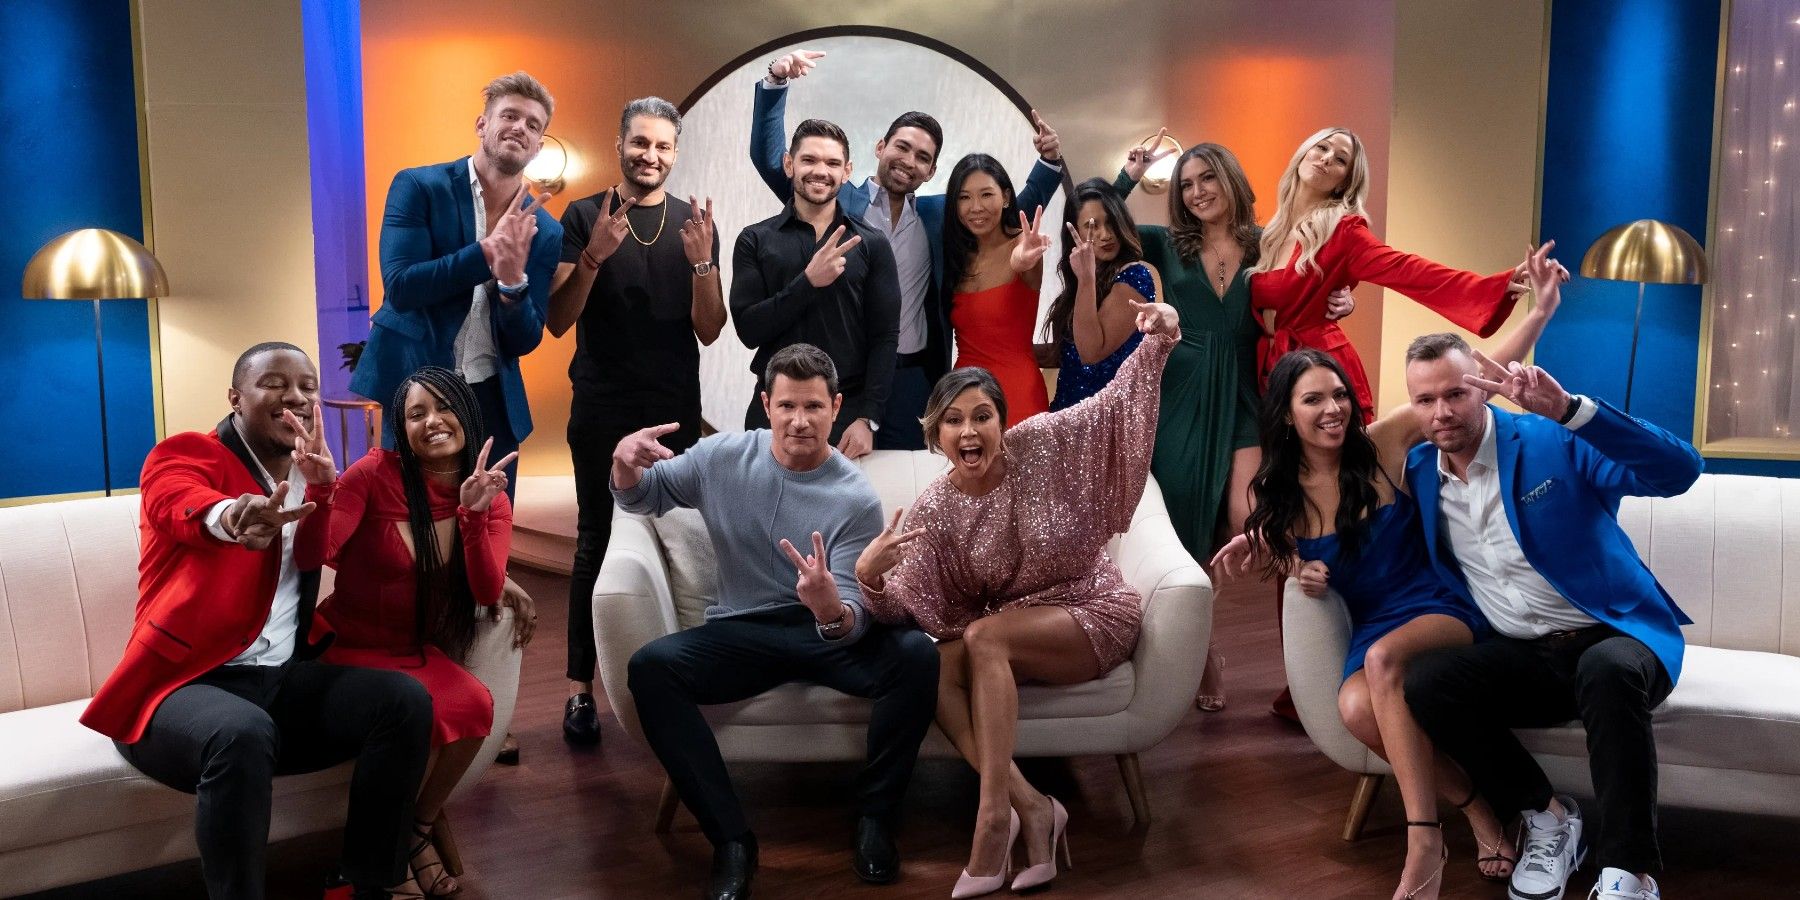 Nick and Vanessa Lachey with the Love Is Blind season 2 cast.